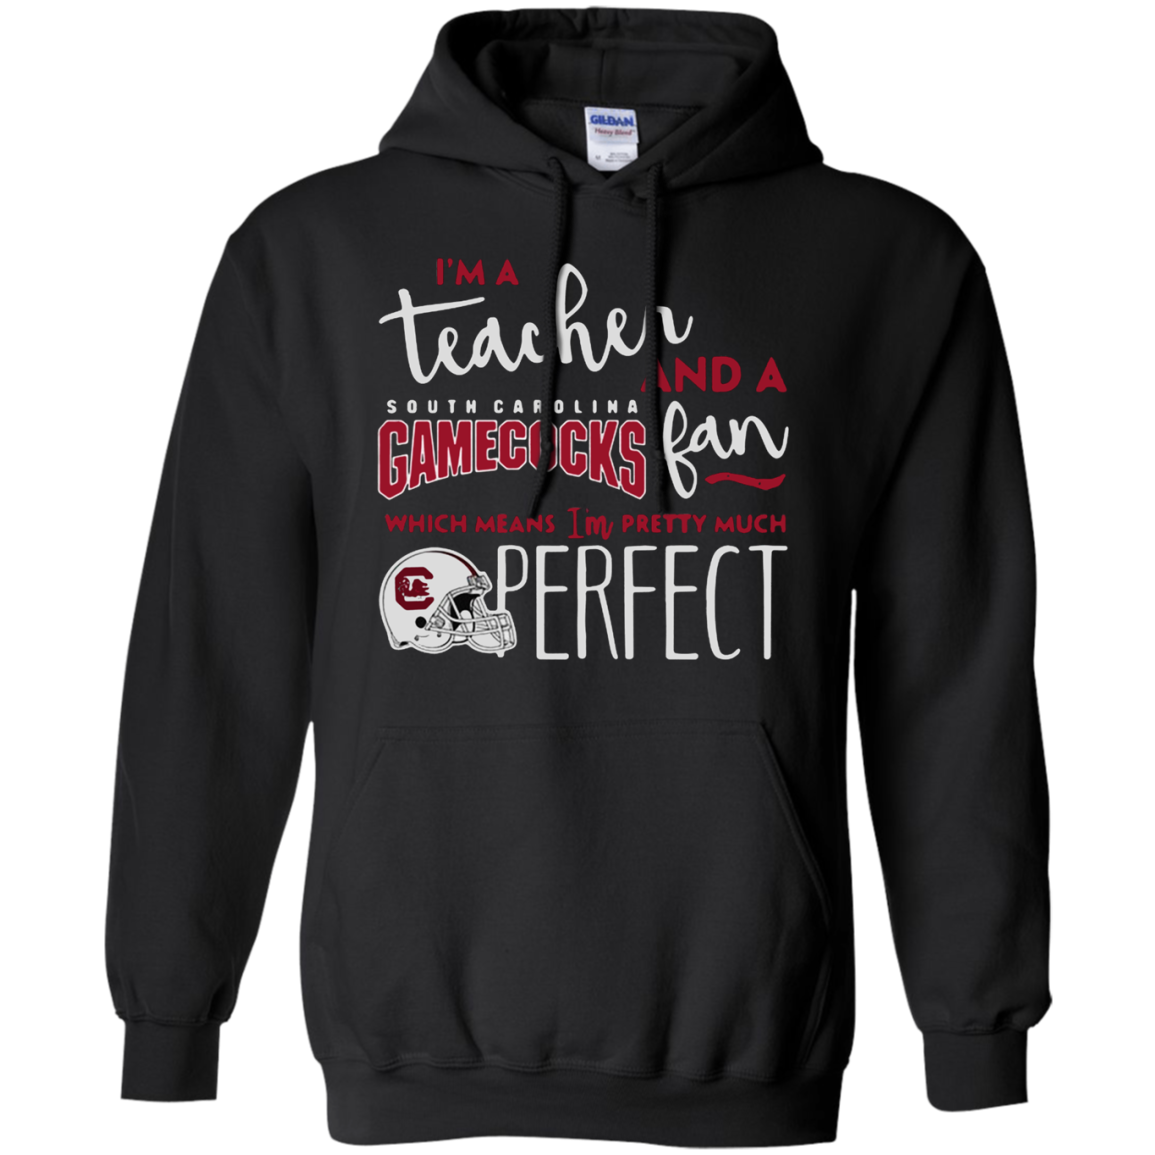 Iâ™m A Tea And A South Carolina Gamecocks Fan Which Means Iâ™m Pretty Much Perfect Shirt G185 Pullover 8 Oz.